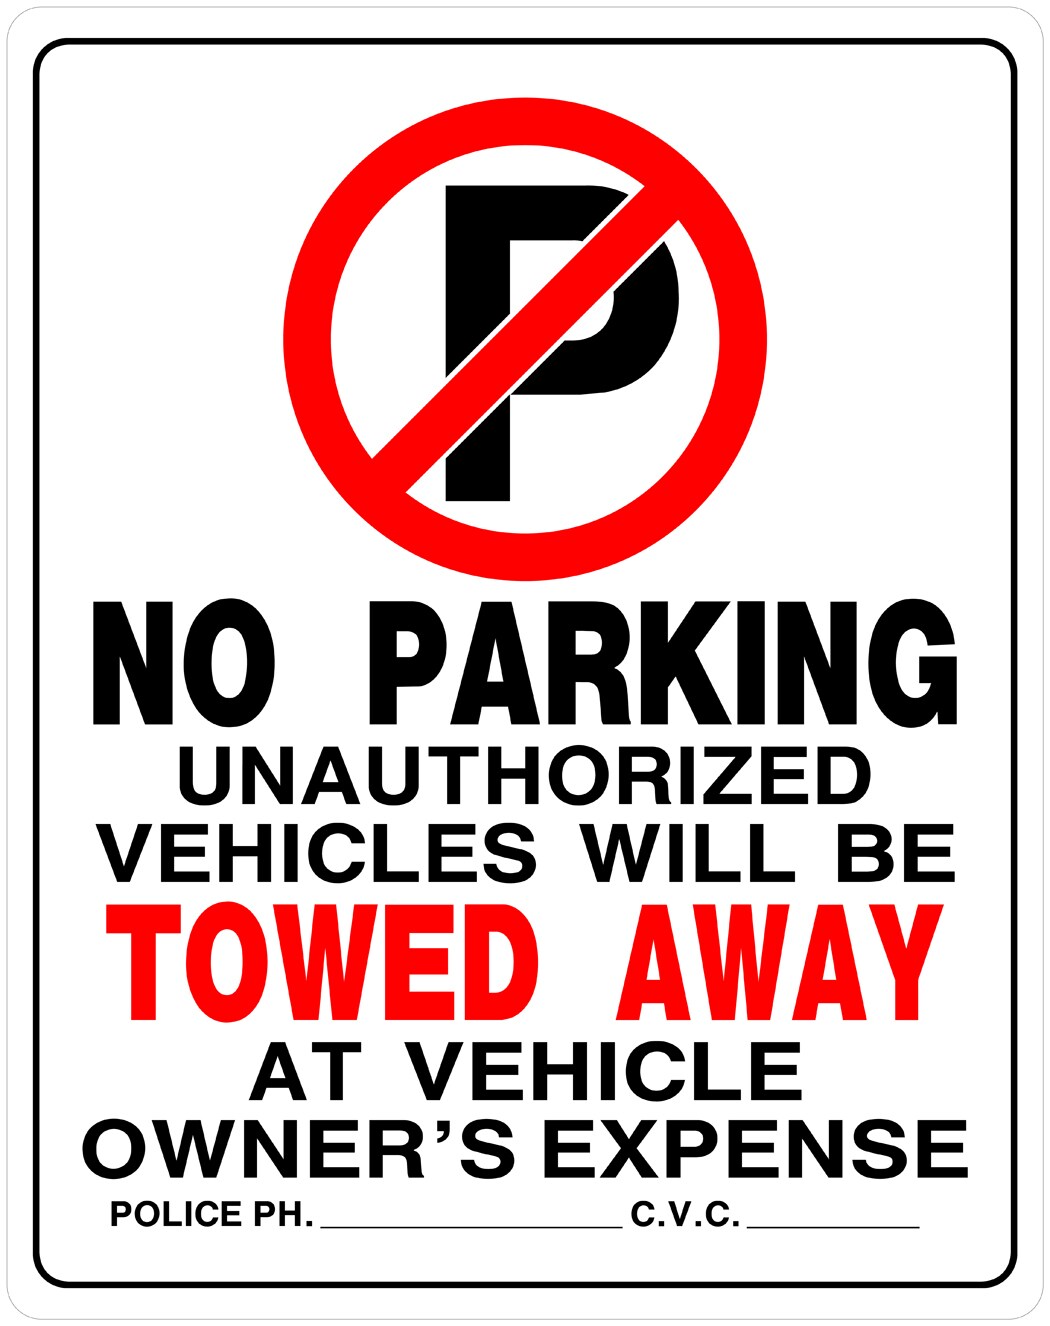 15 Minute Parking More Parking in the Back on a 8"x12" Aluminum Sign Made in USA 